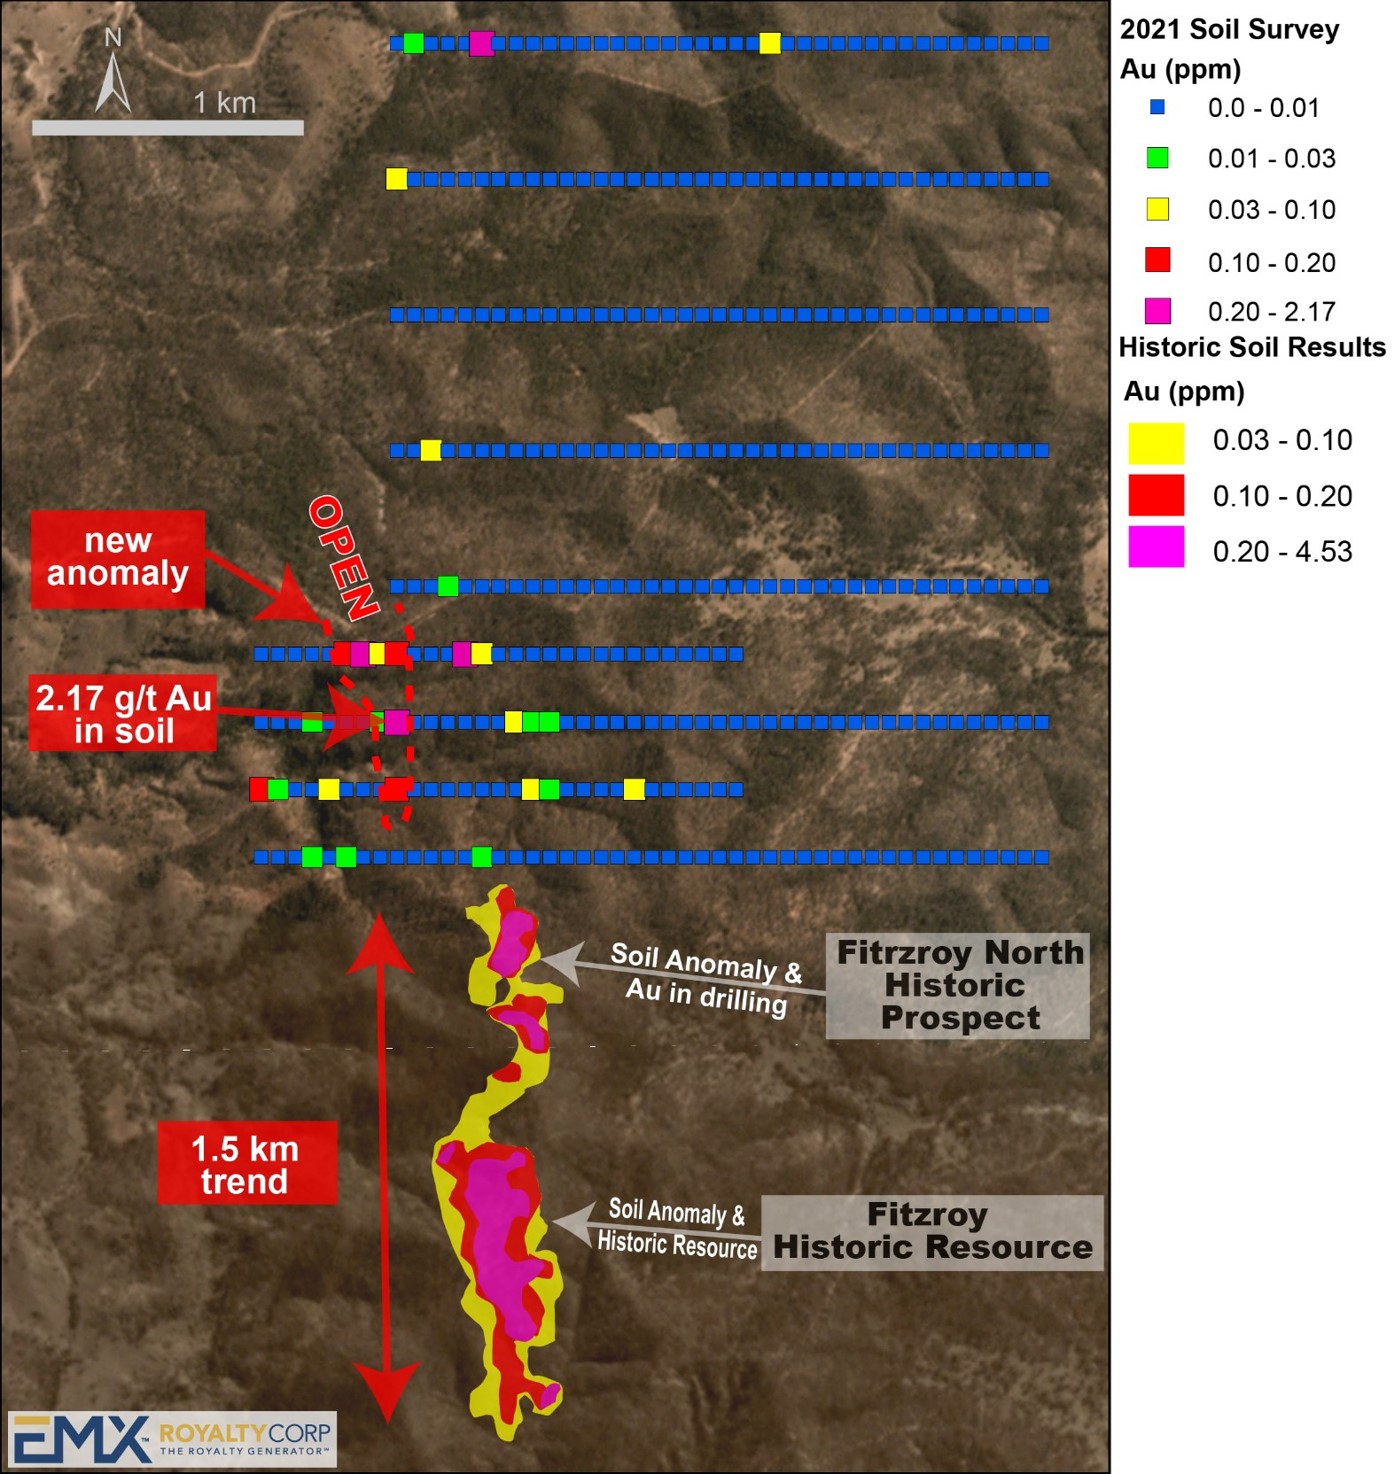 map of Mt Steadman 2021 and historic soil survey results.